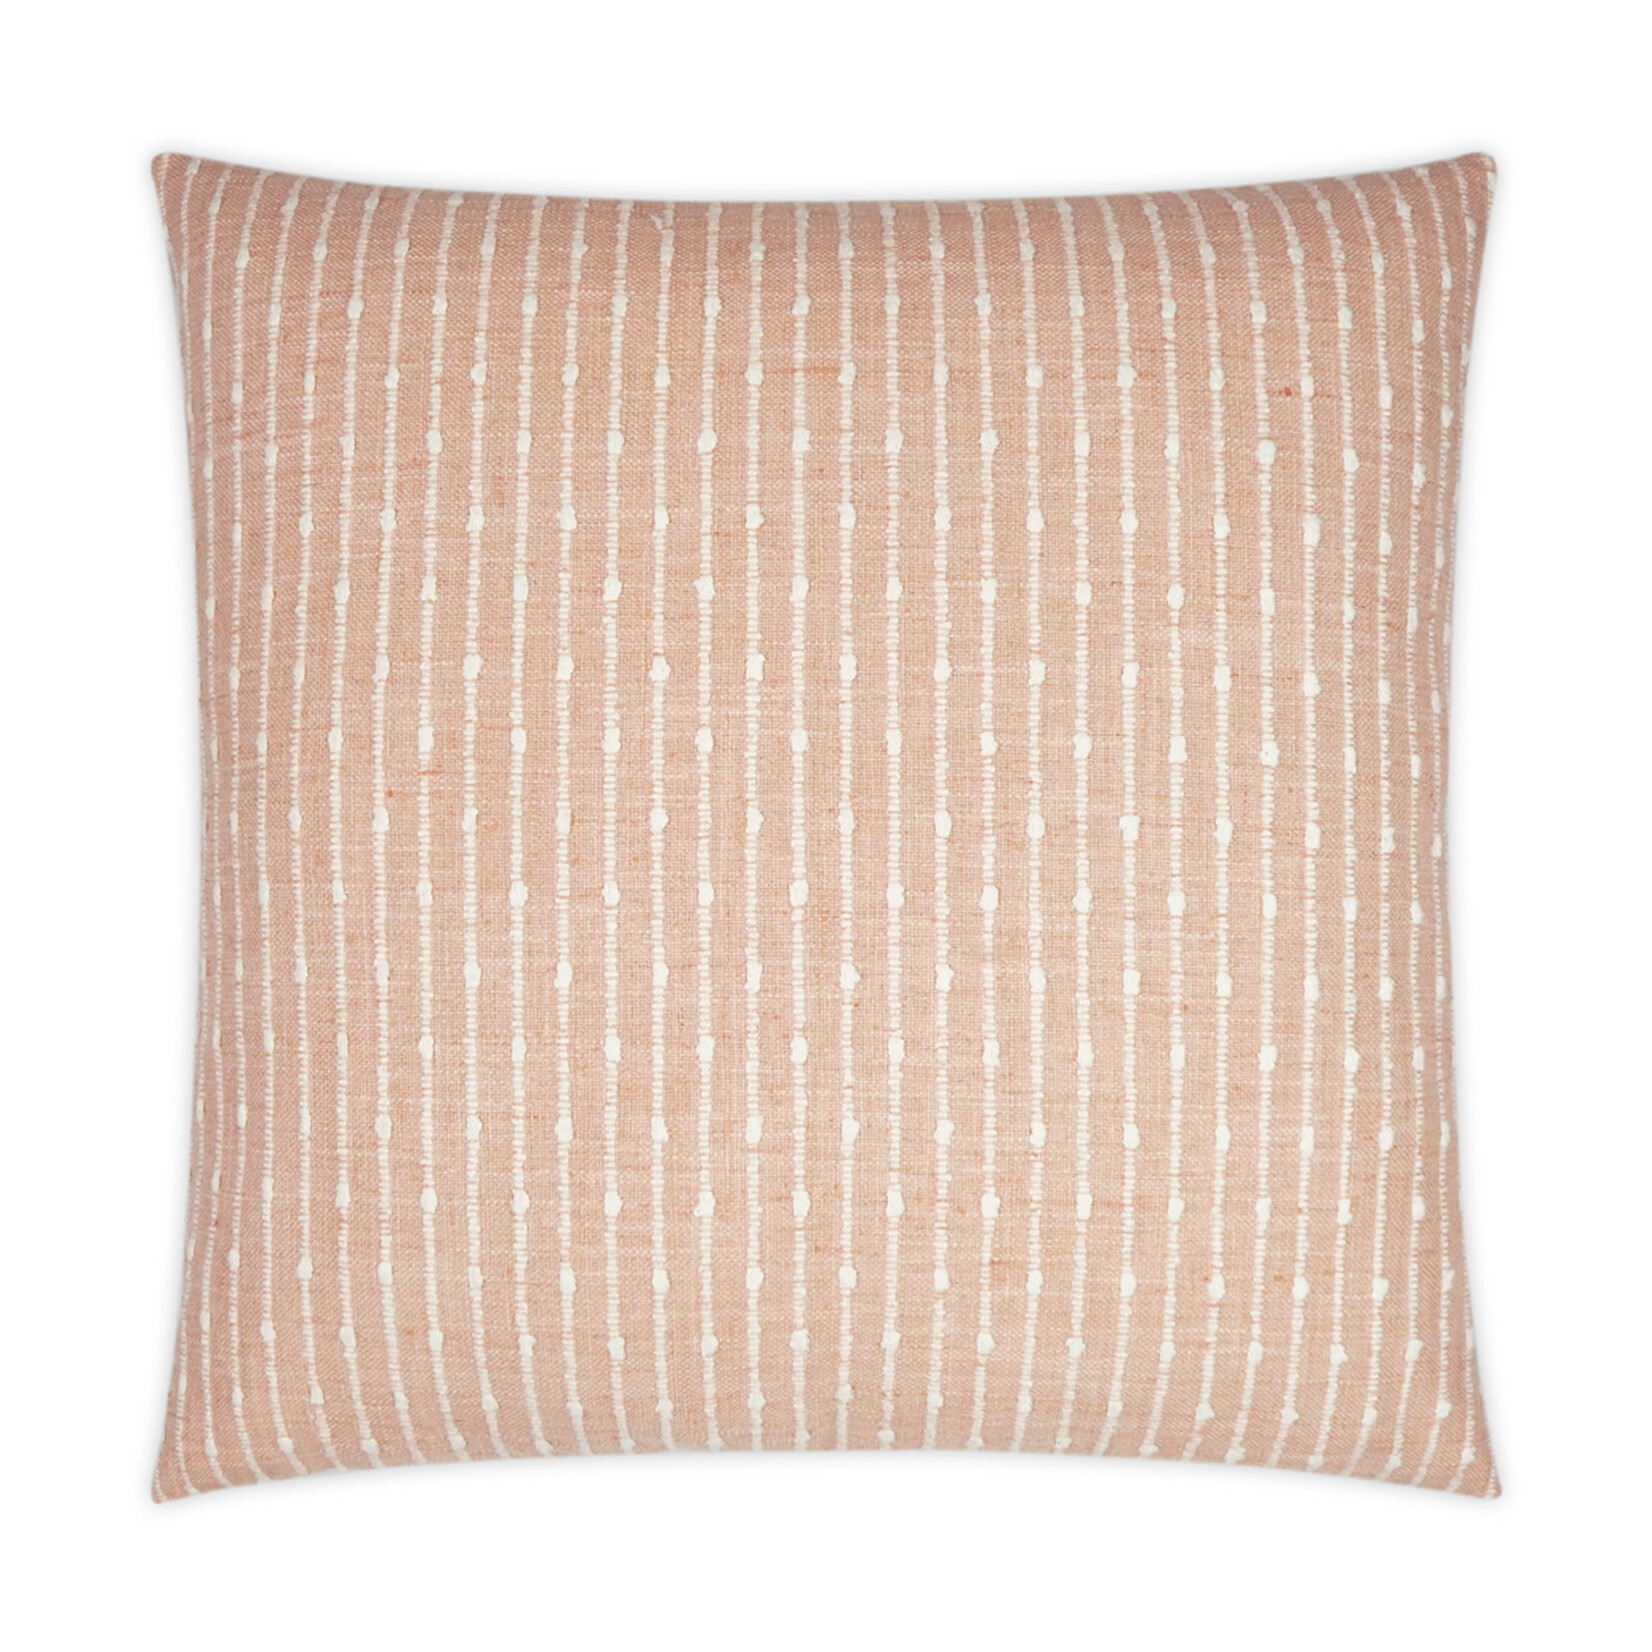 Outside The Box 24x24 Kemp Square Feather Down Pillow In Blush